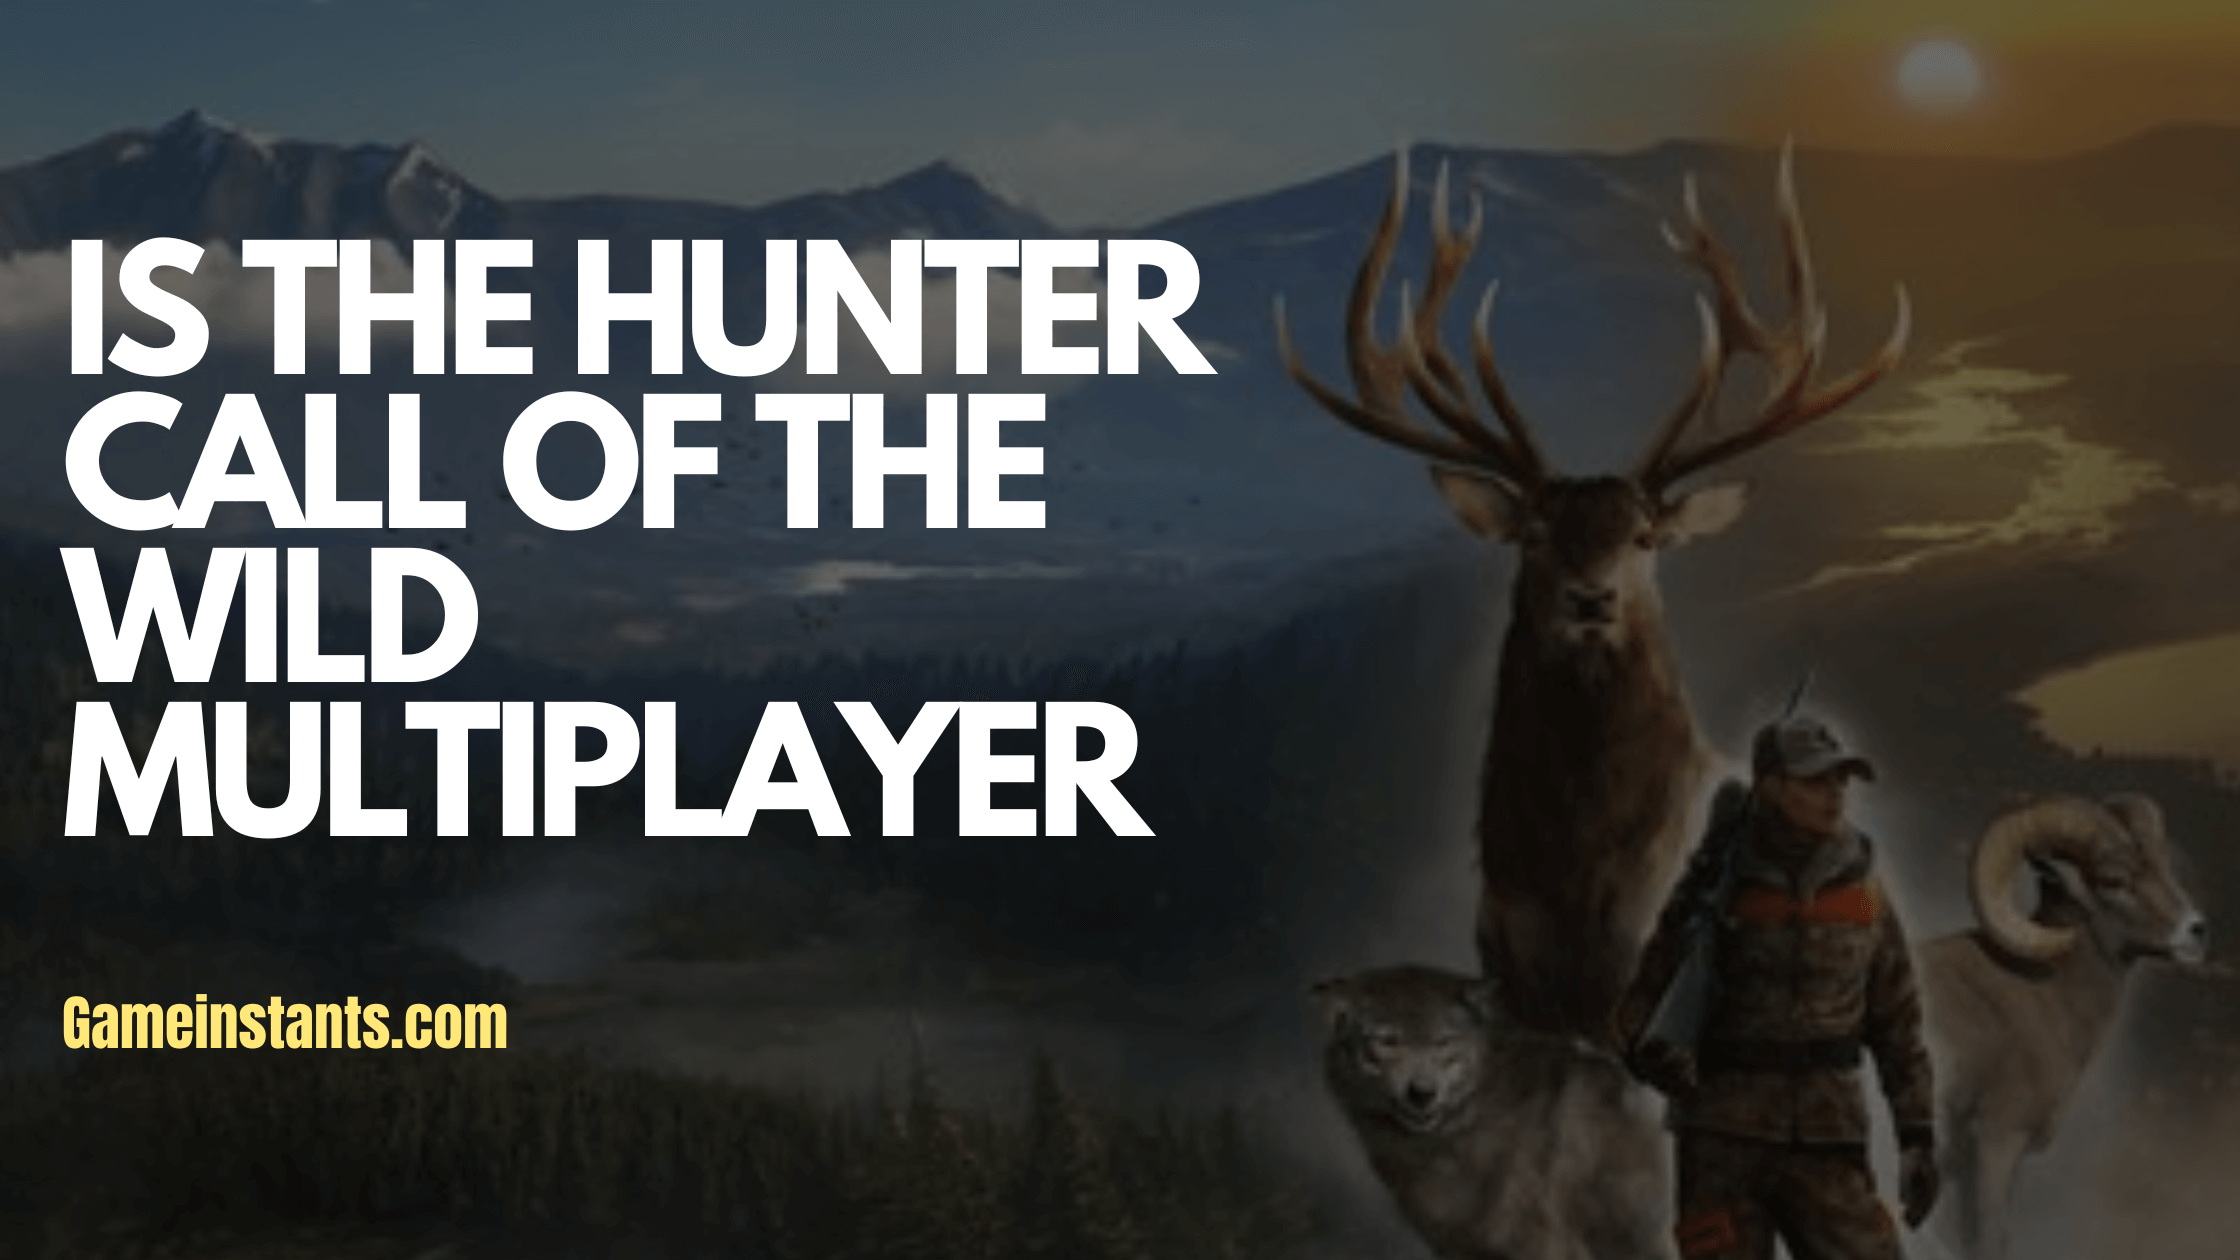 is the hunter call of the wild multiplayer